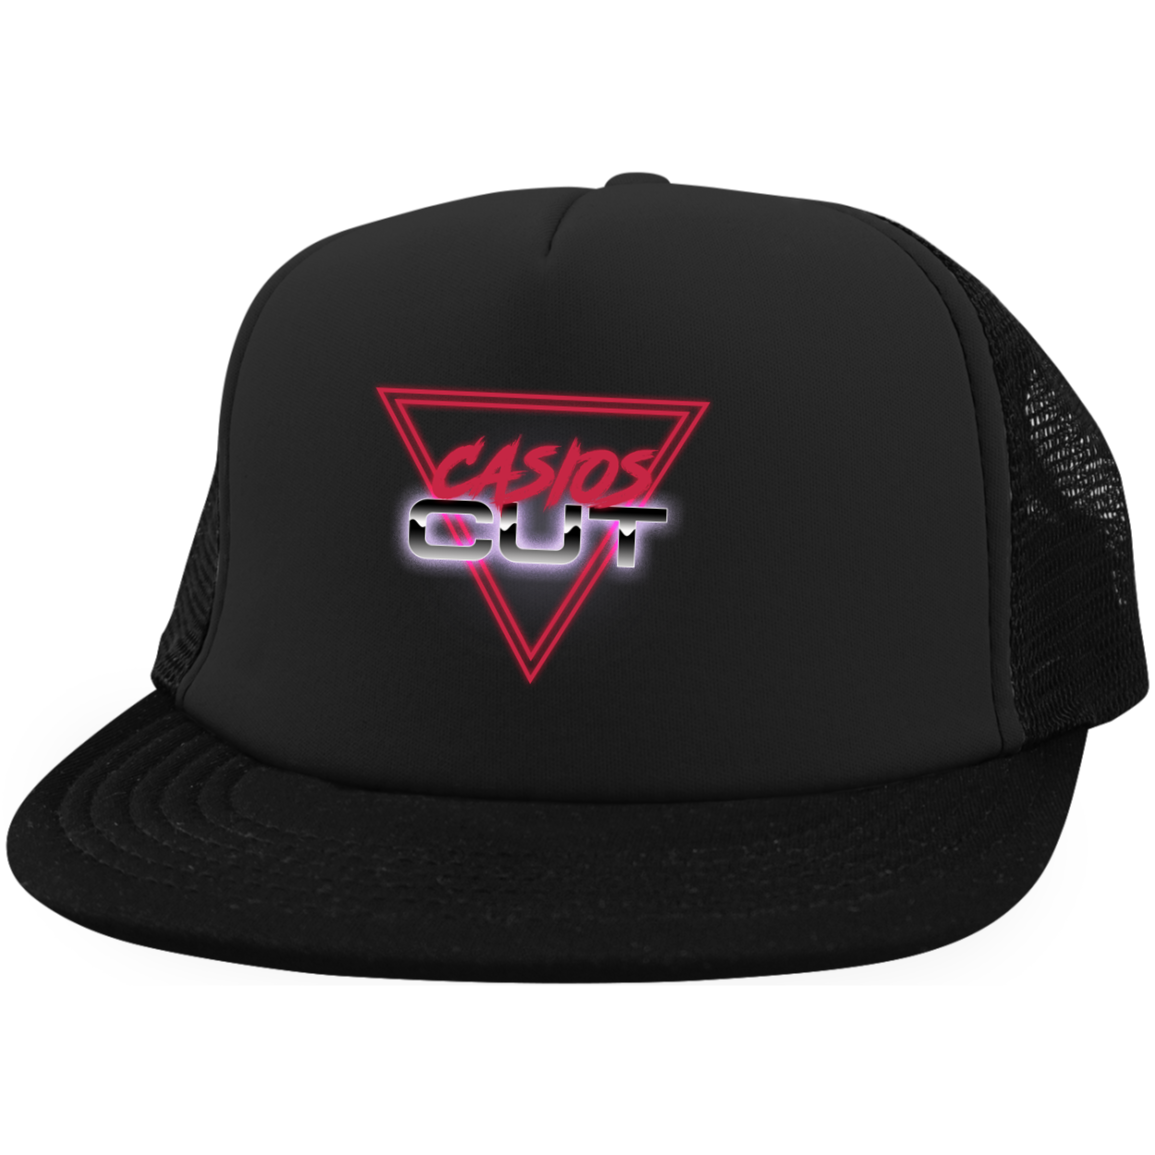 80s Trucker Hat with Snapback